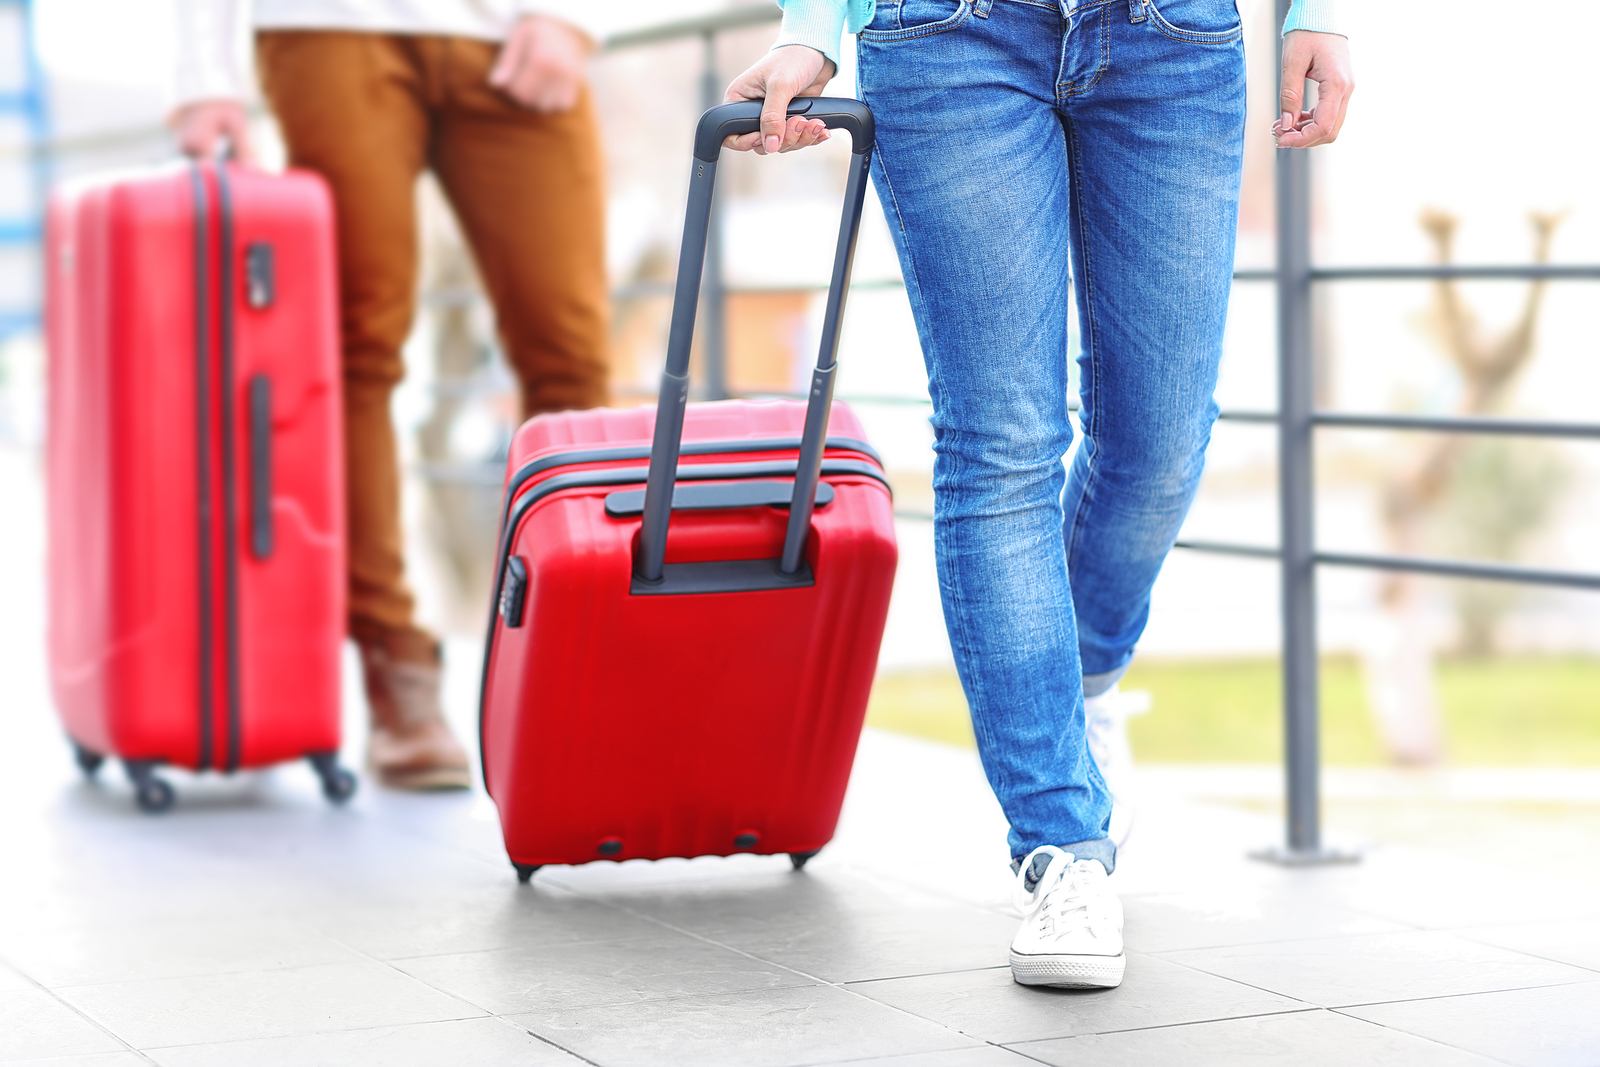 Couple rolling large red suitcases, close up